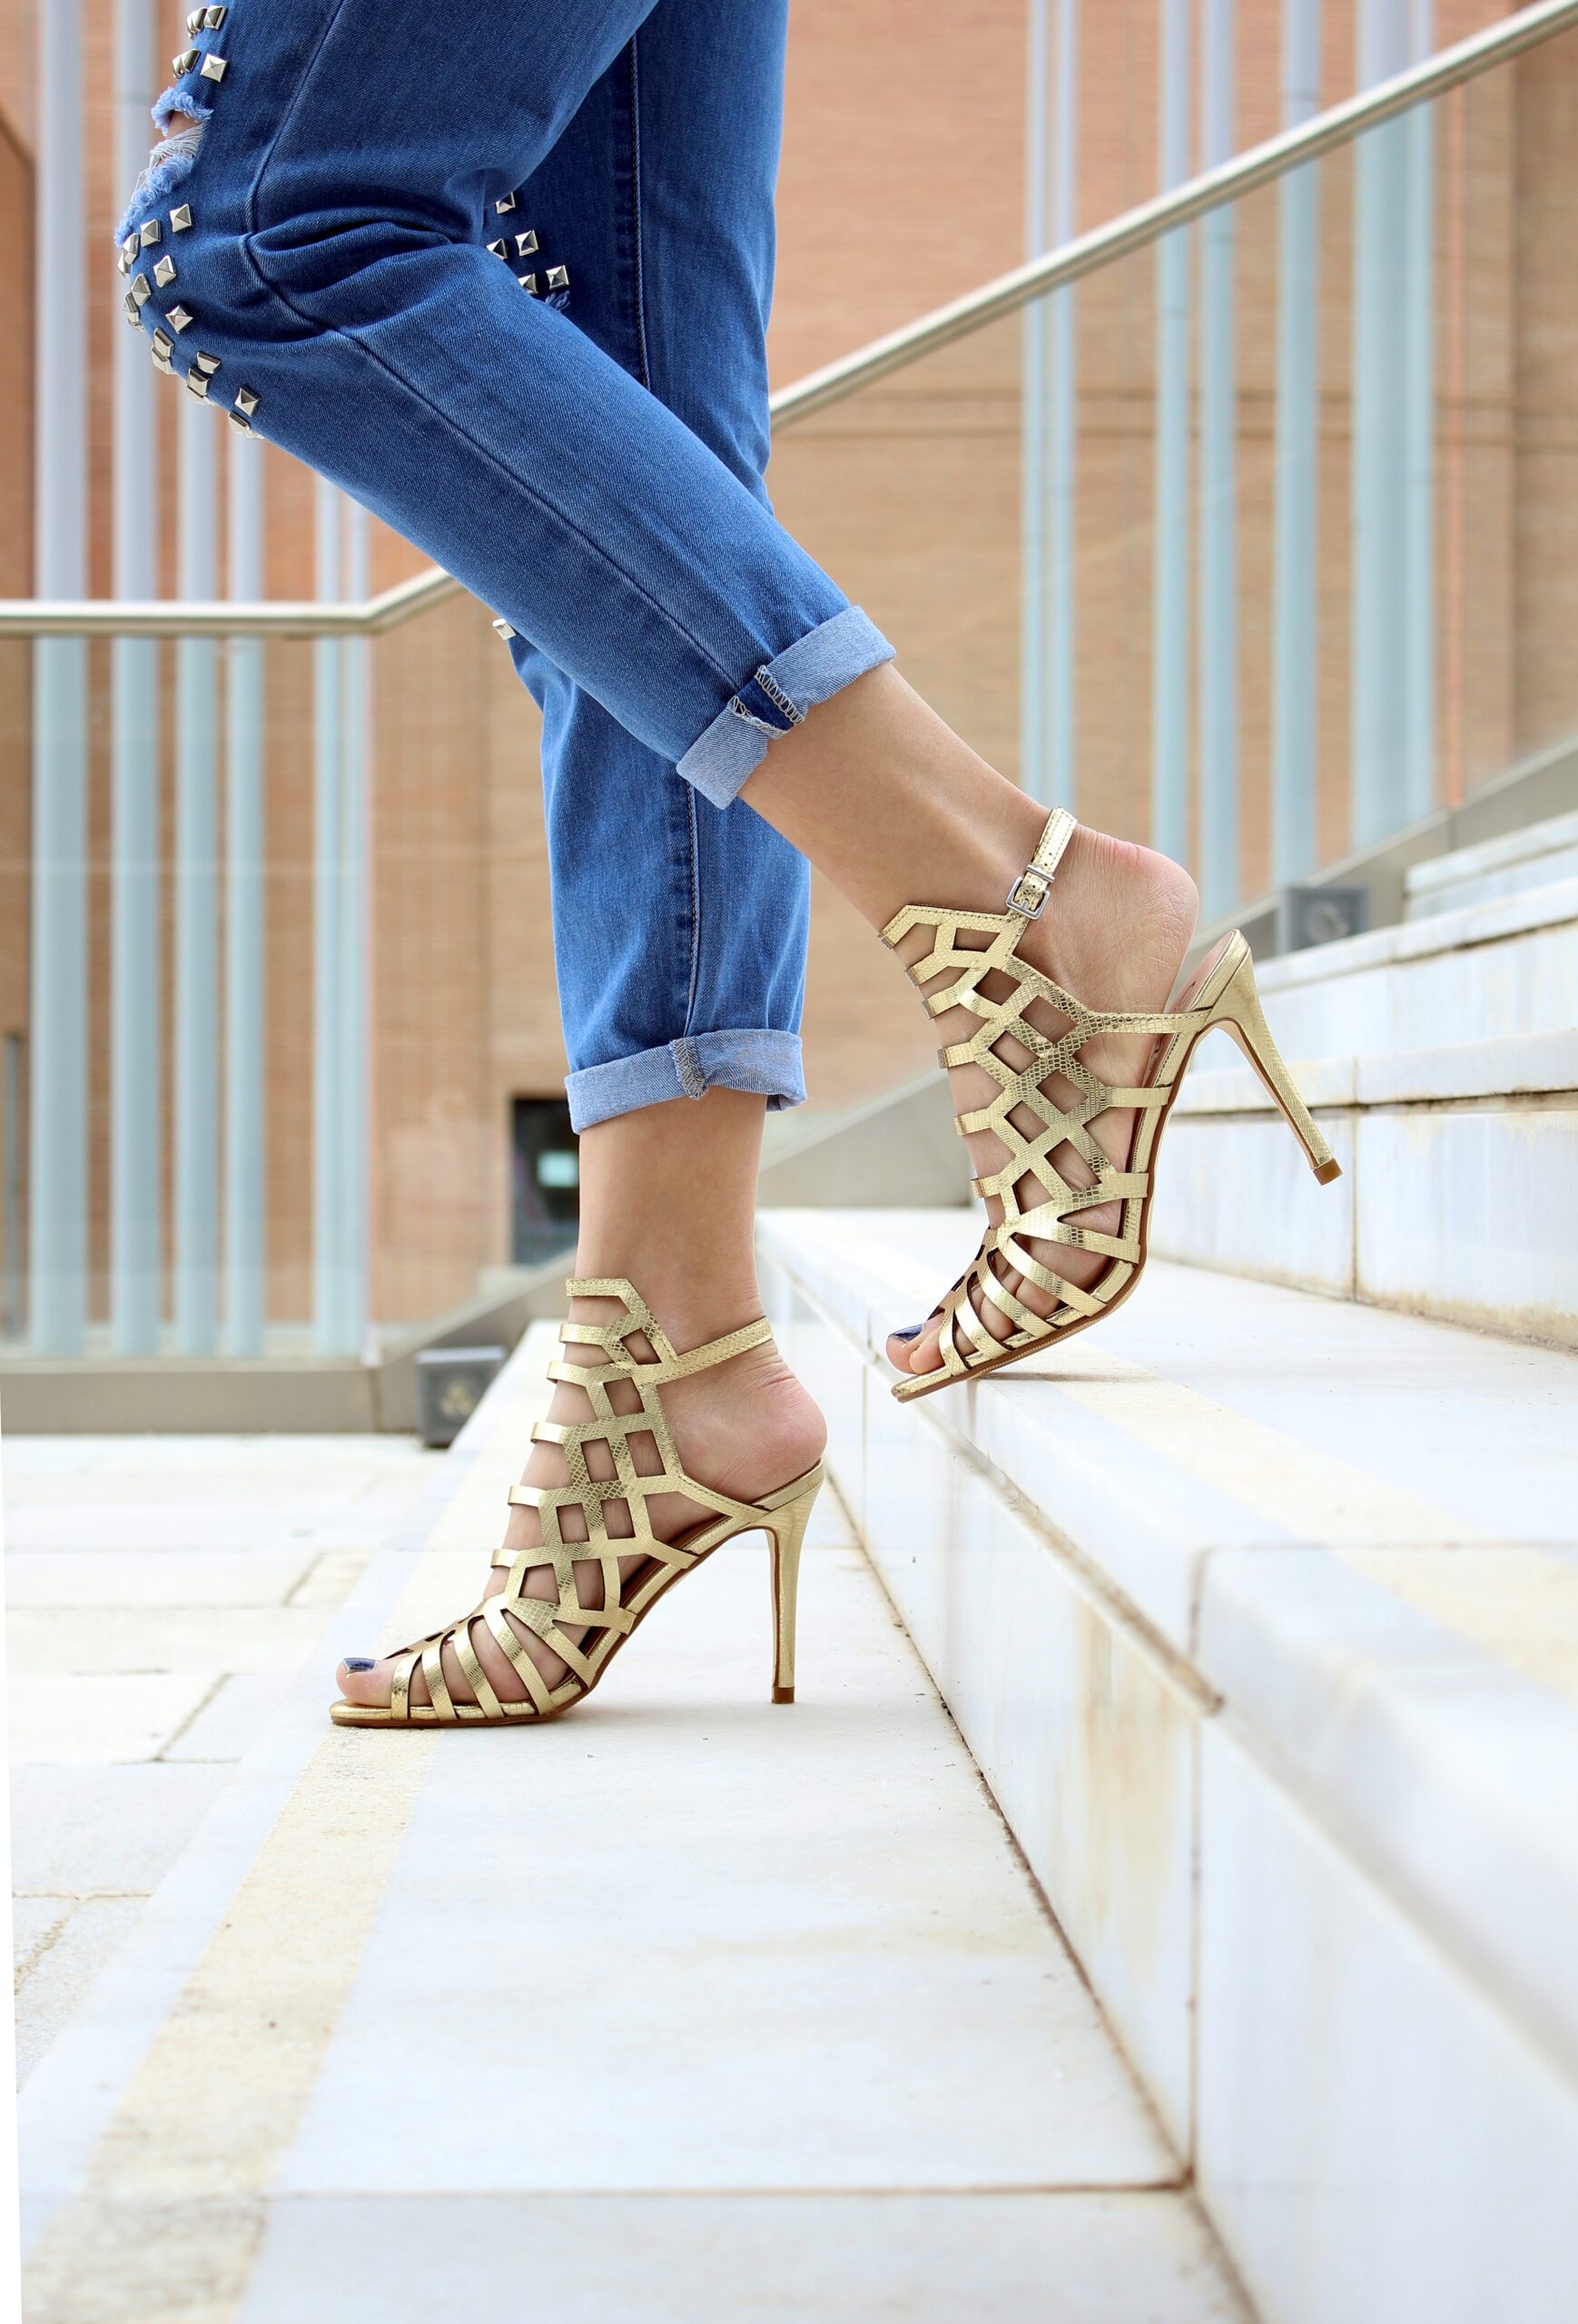 Woman wearing jeans and high heels